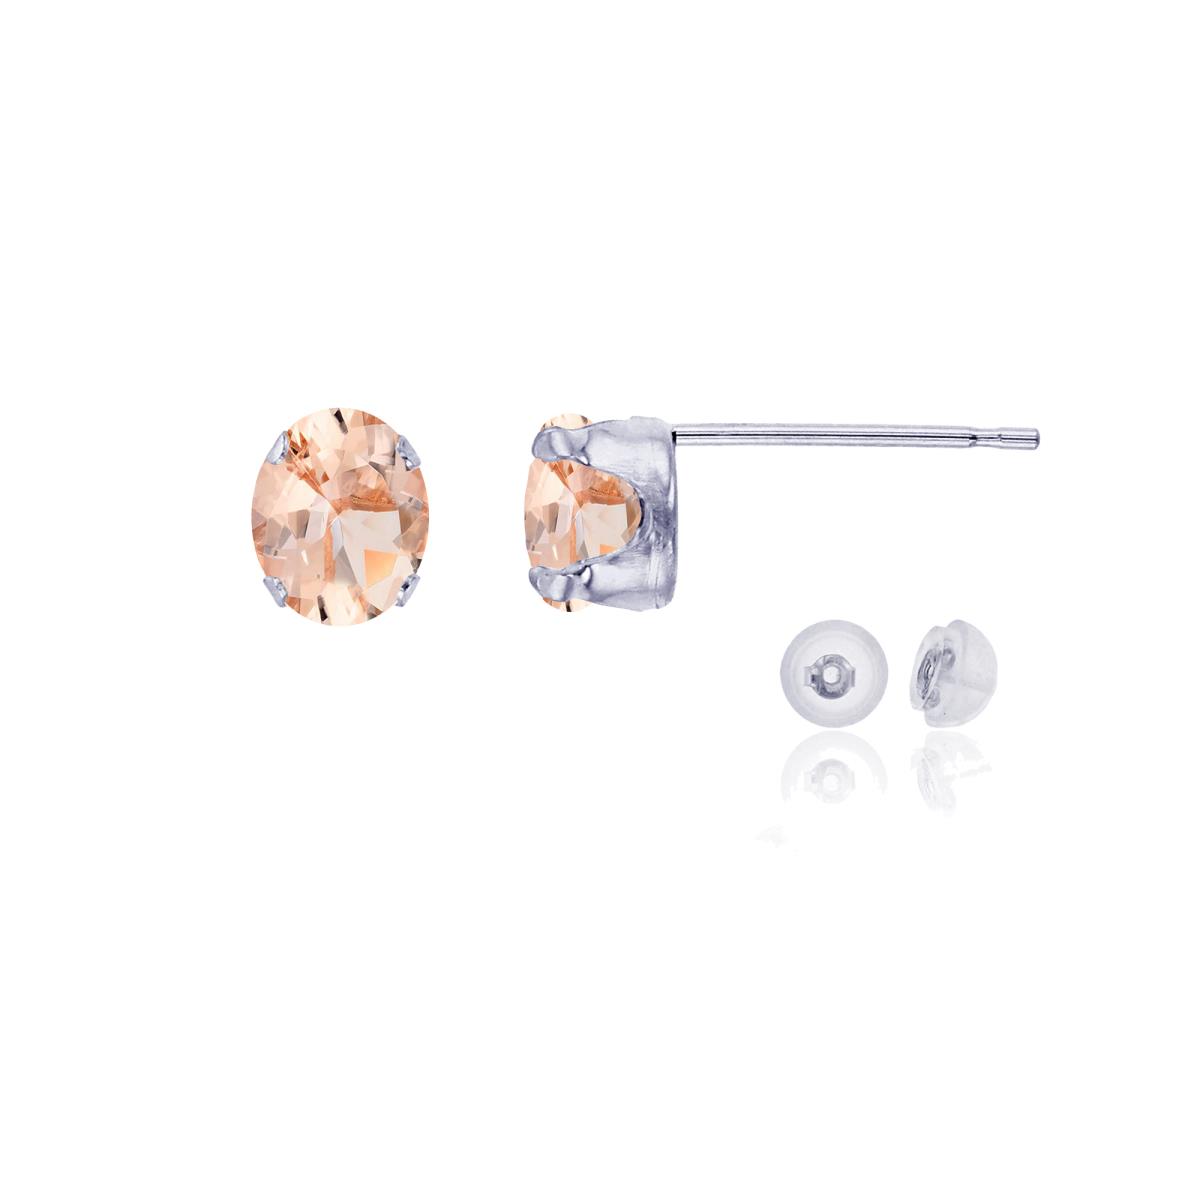 10K White Gold 6x4mm Oval Morganite Stud Earring with Silicone Back